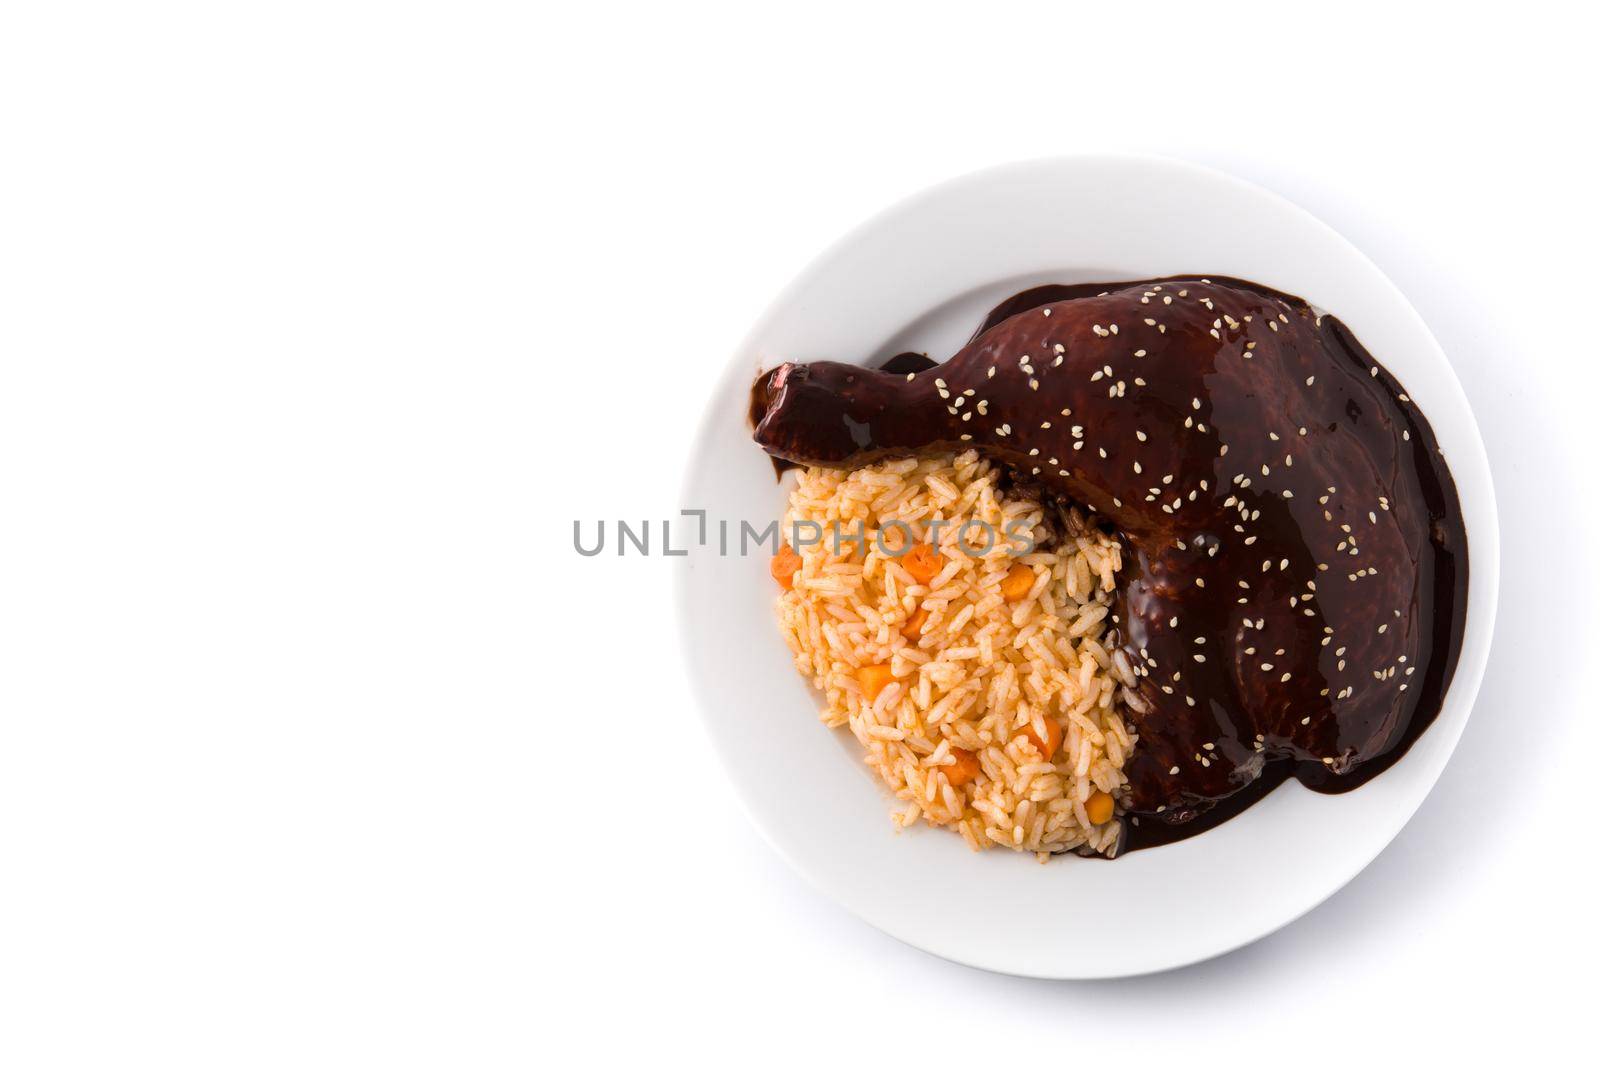 Traditional mole Poblano with rice in plate by chandlervid85